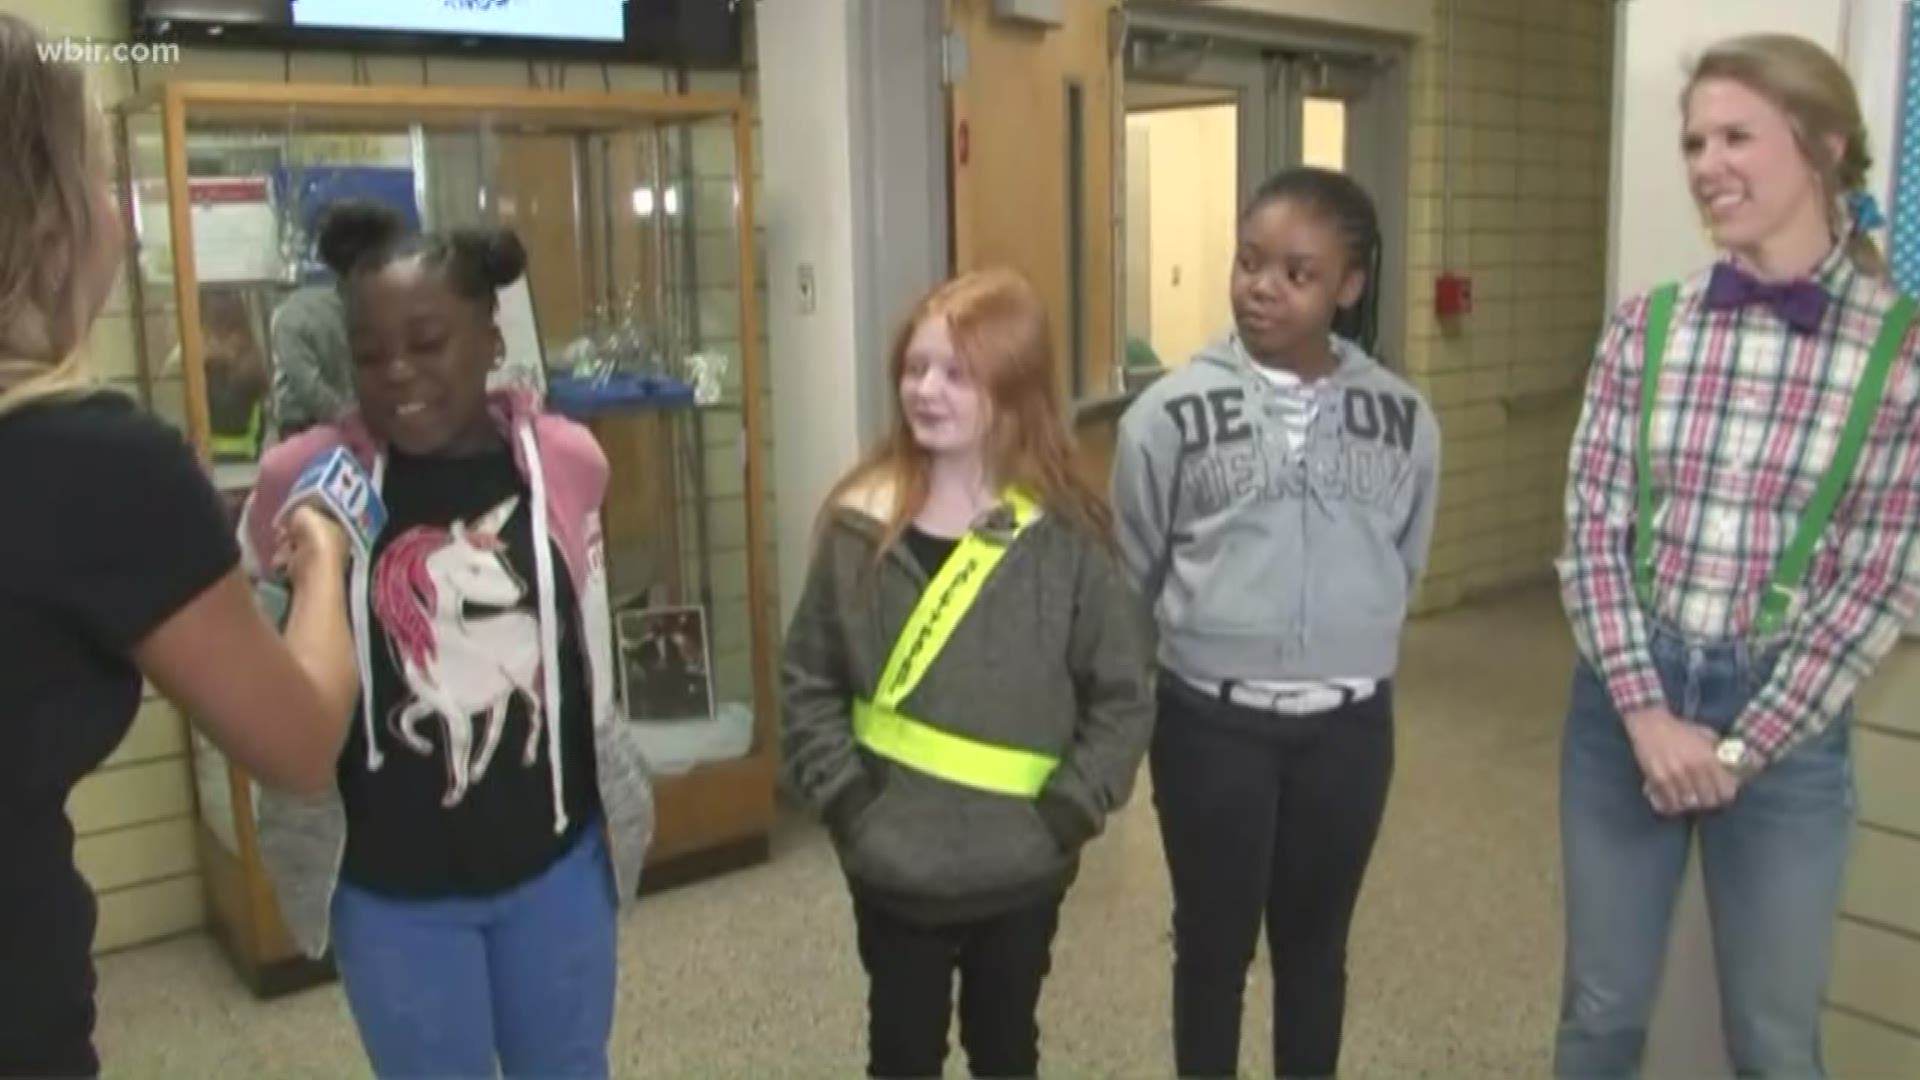 10News Reporter Rebecca Sweet spoke with the principal and some cool students at this school!